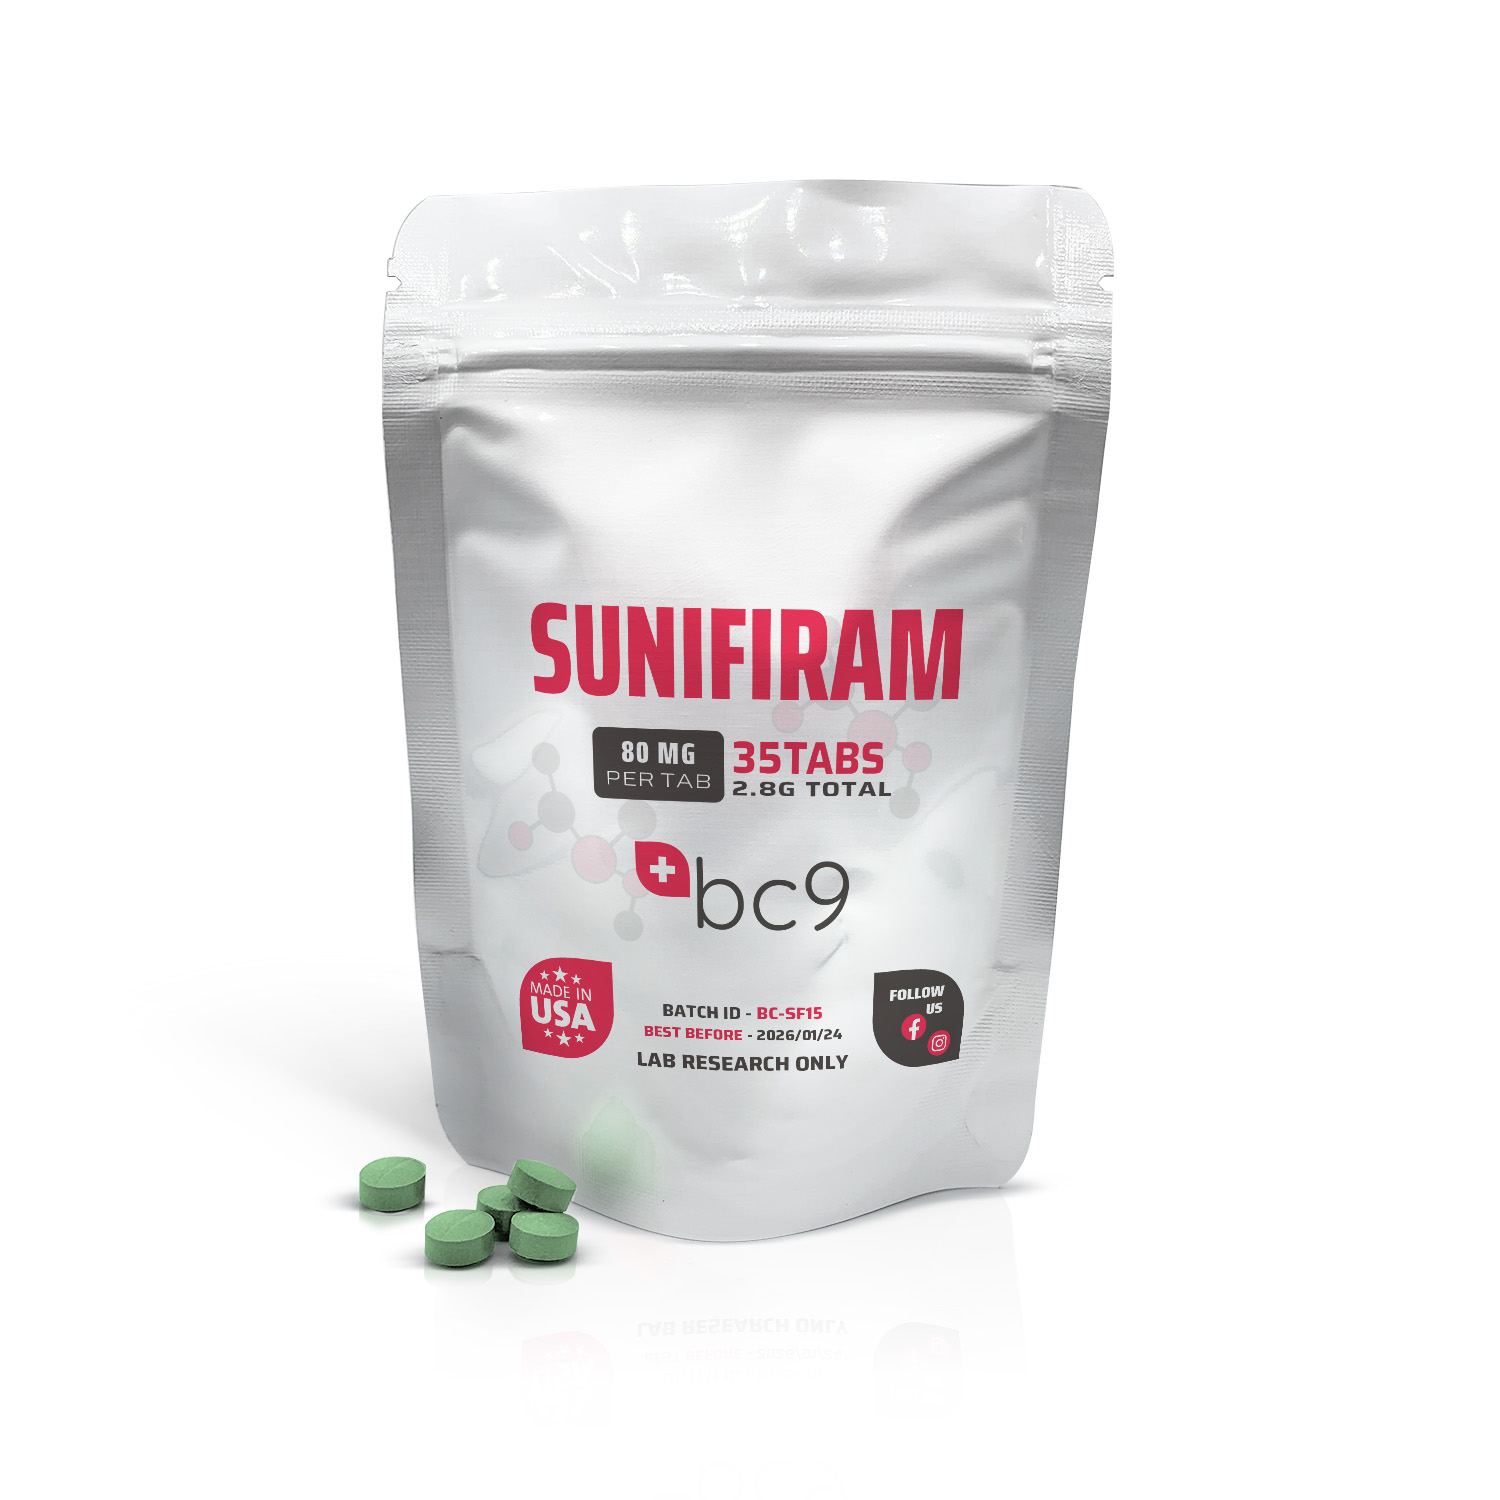 Sunifiram Tablets For Sale | Fast Shipping | BC9.org